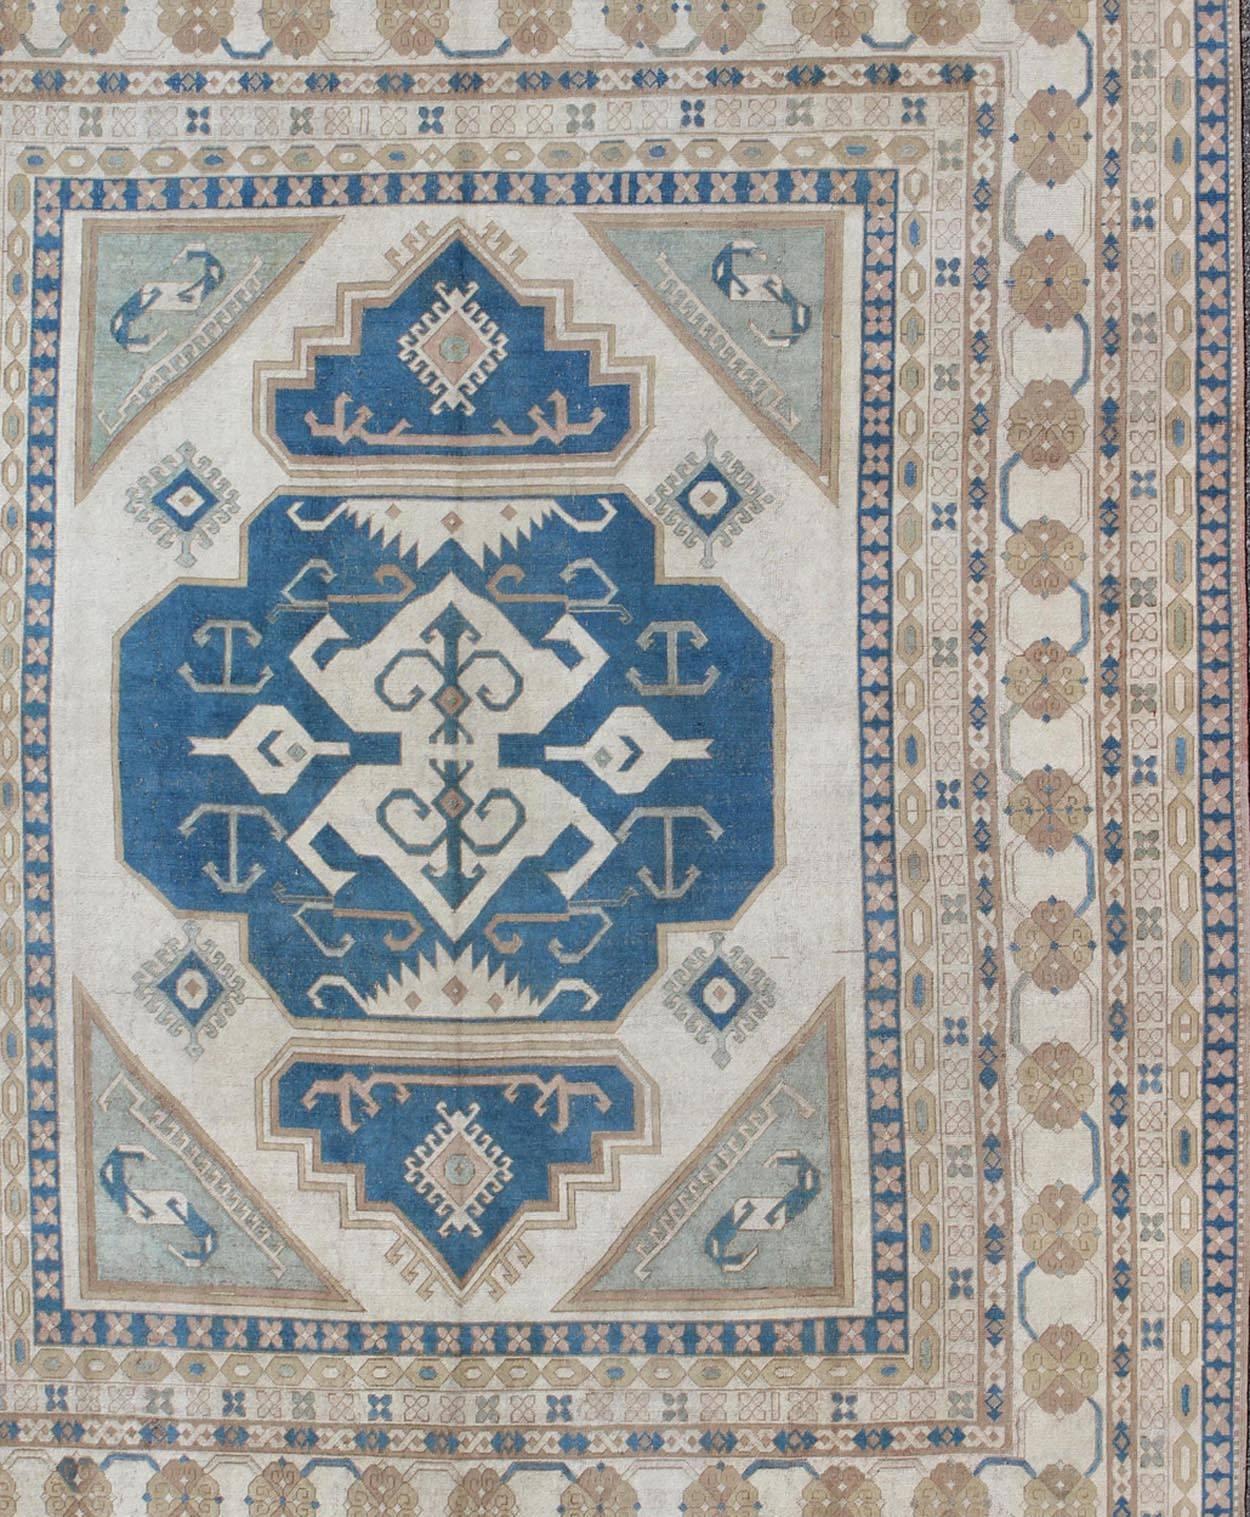 Large vintage Turkish rug with stylized geometric design in blue, ivory, tan. Keivan Woven Arts / rug 16-0914, country of origin / type: Turkey / Oushak, circa 1950
Measures: 13' x 15'8.
This vintage Turkish Oushak rug features an intricately